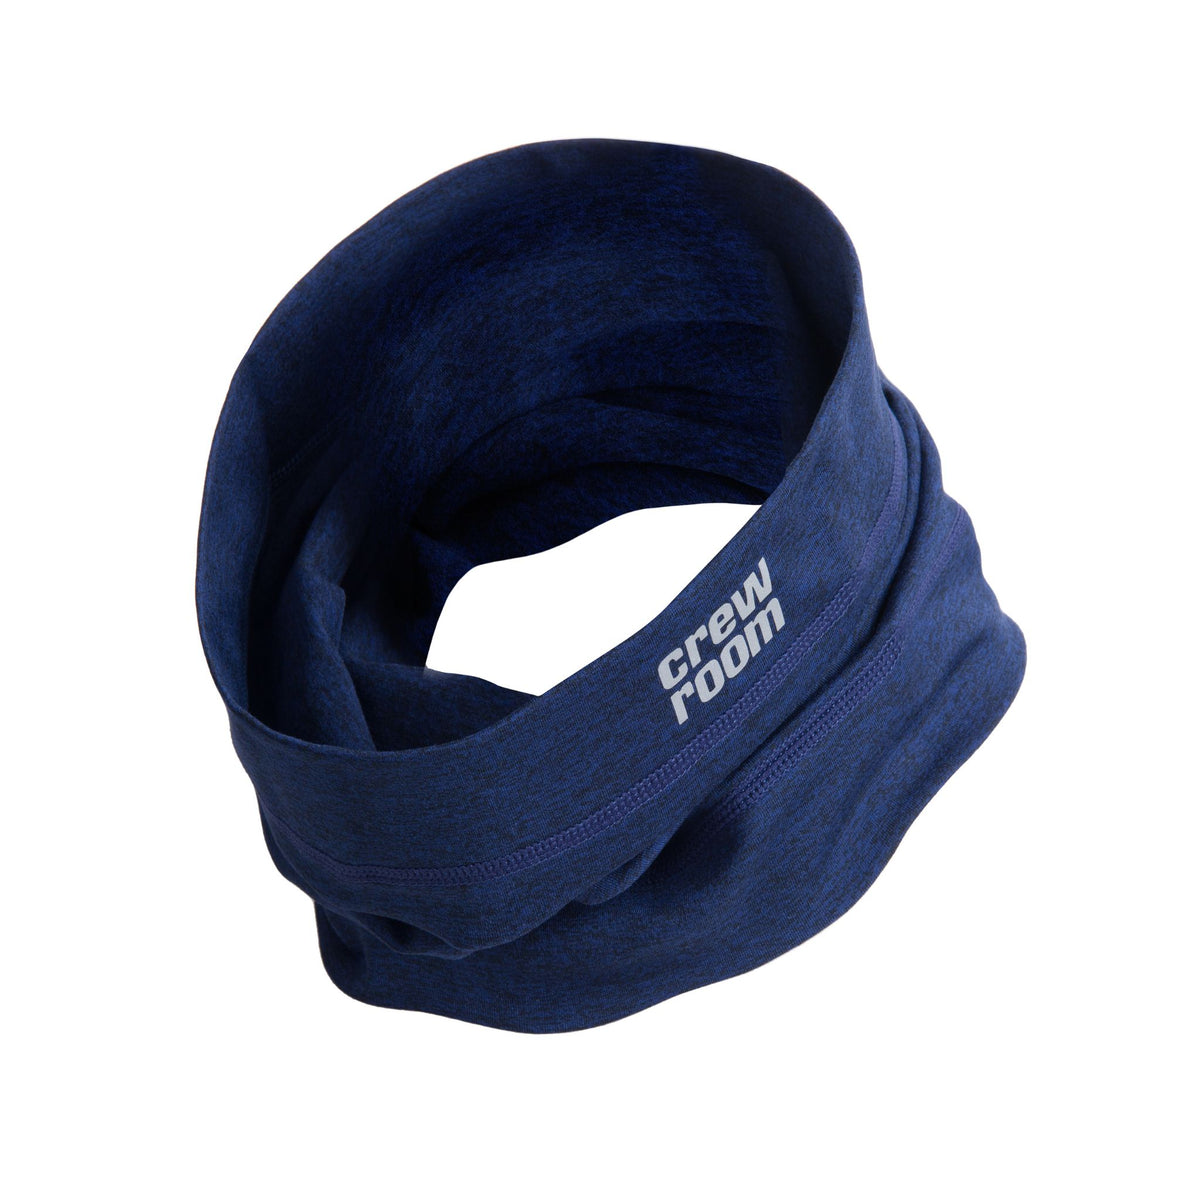 The Classic Snood